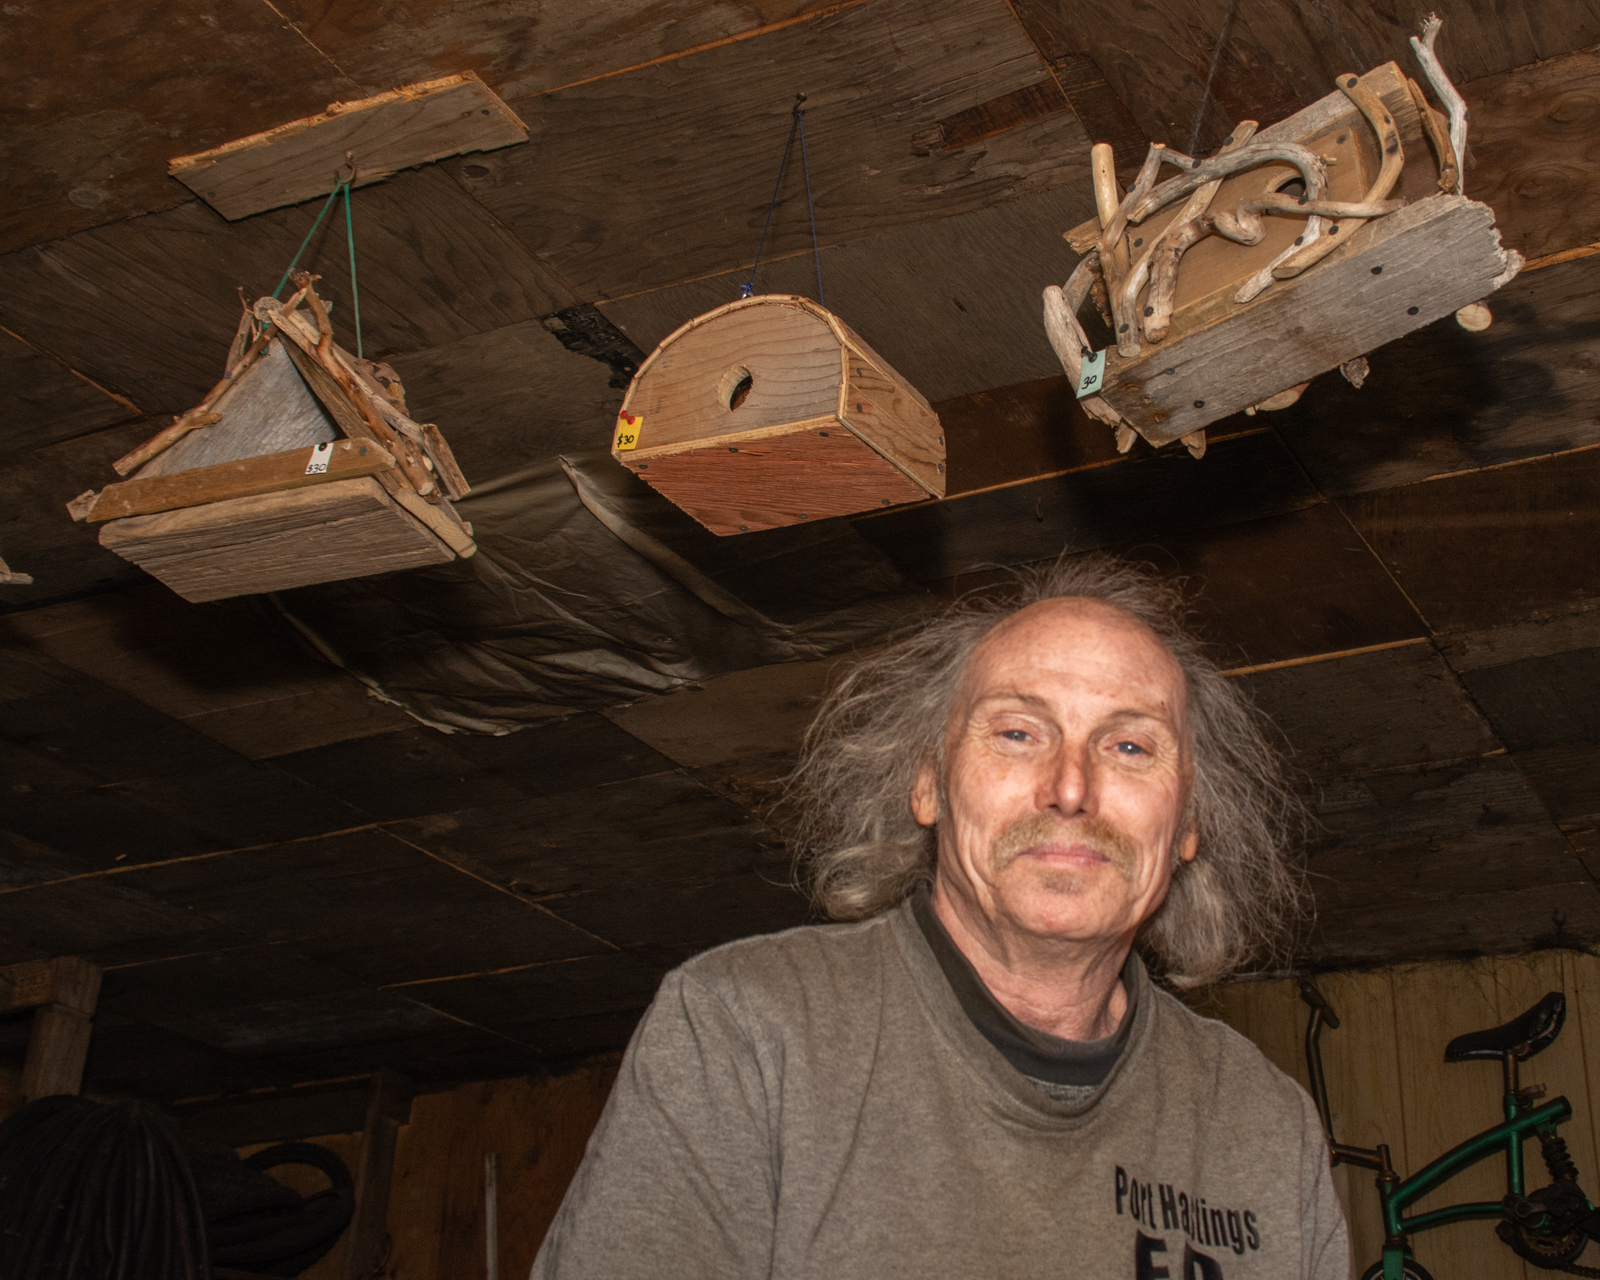 Bernie with some of his birdhouse creations. You can see evidence of his beach combing both in the materials of the birdhouses, but the shop wall and ceiling covering. It would be hard not to admire that kind of perseverance and resourcefulness